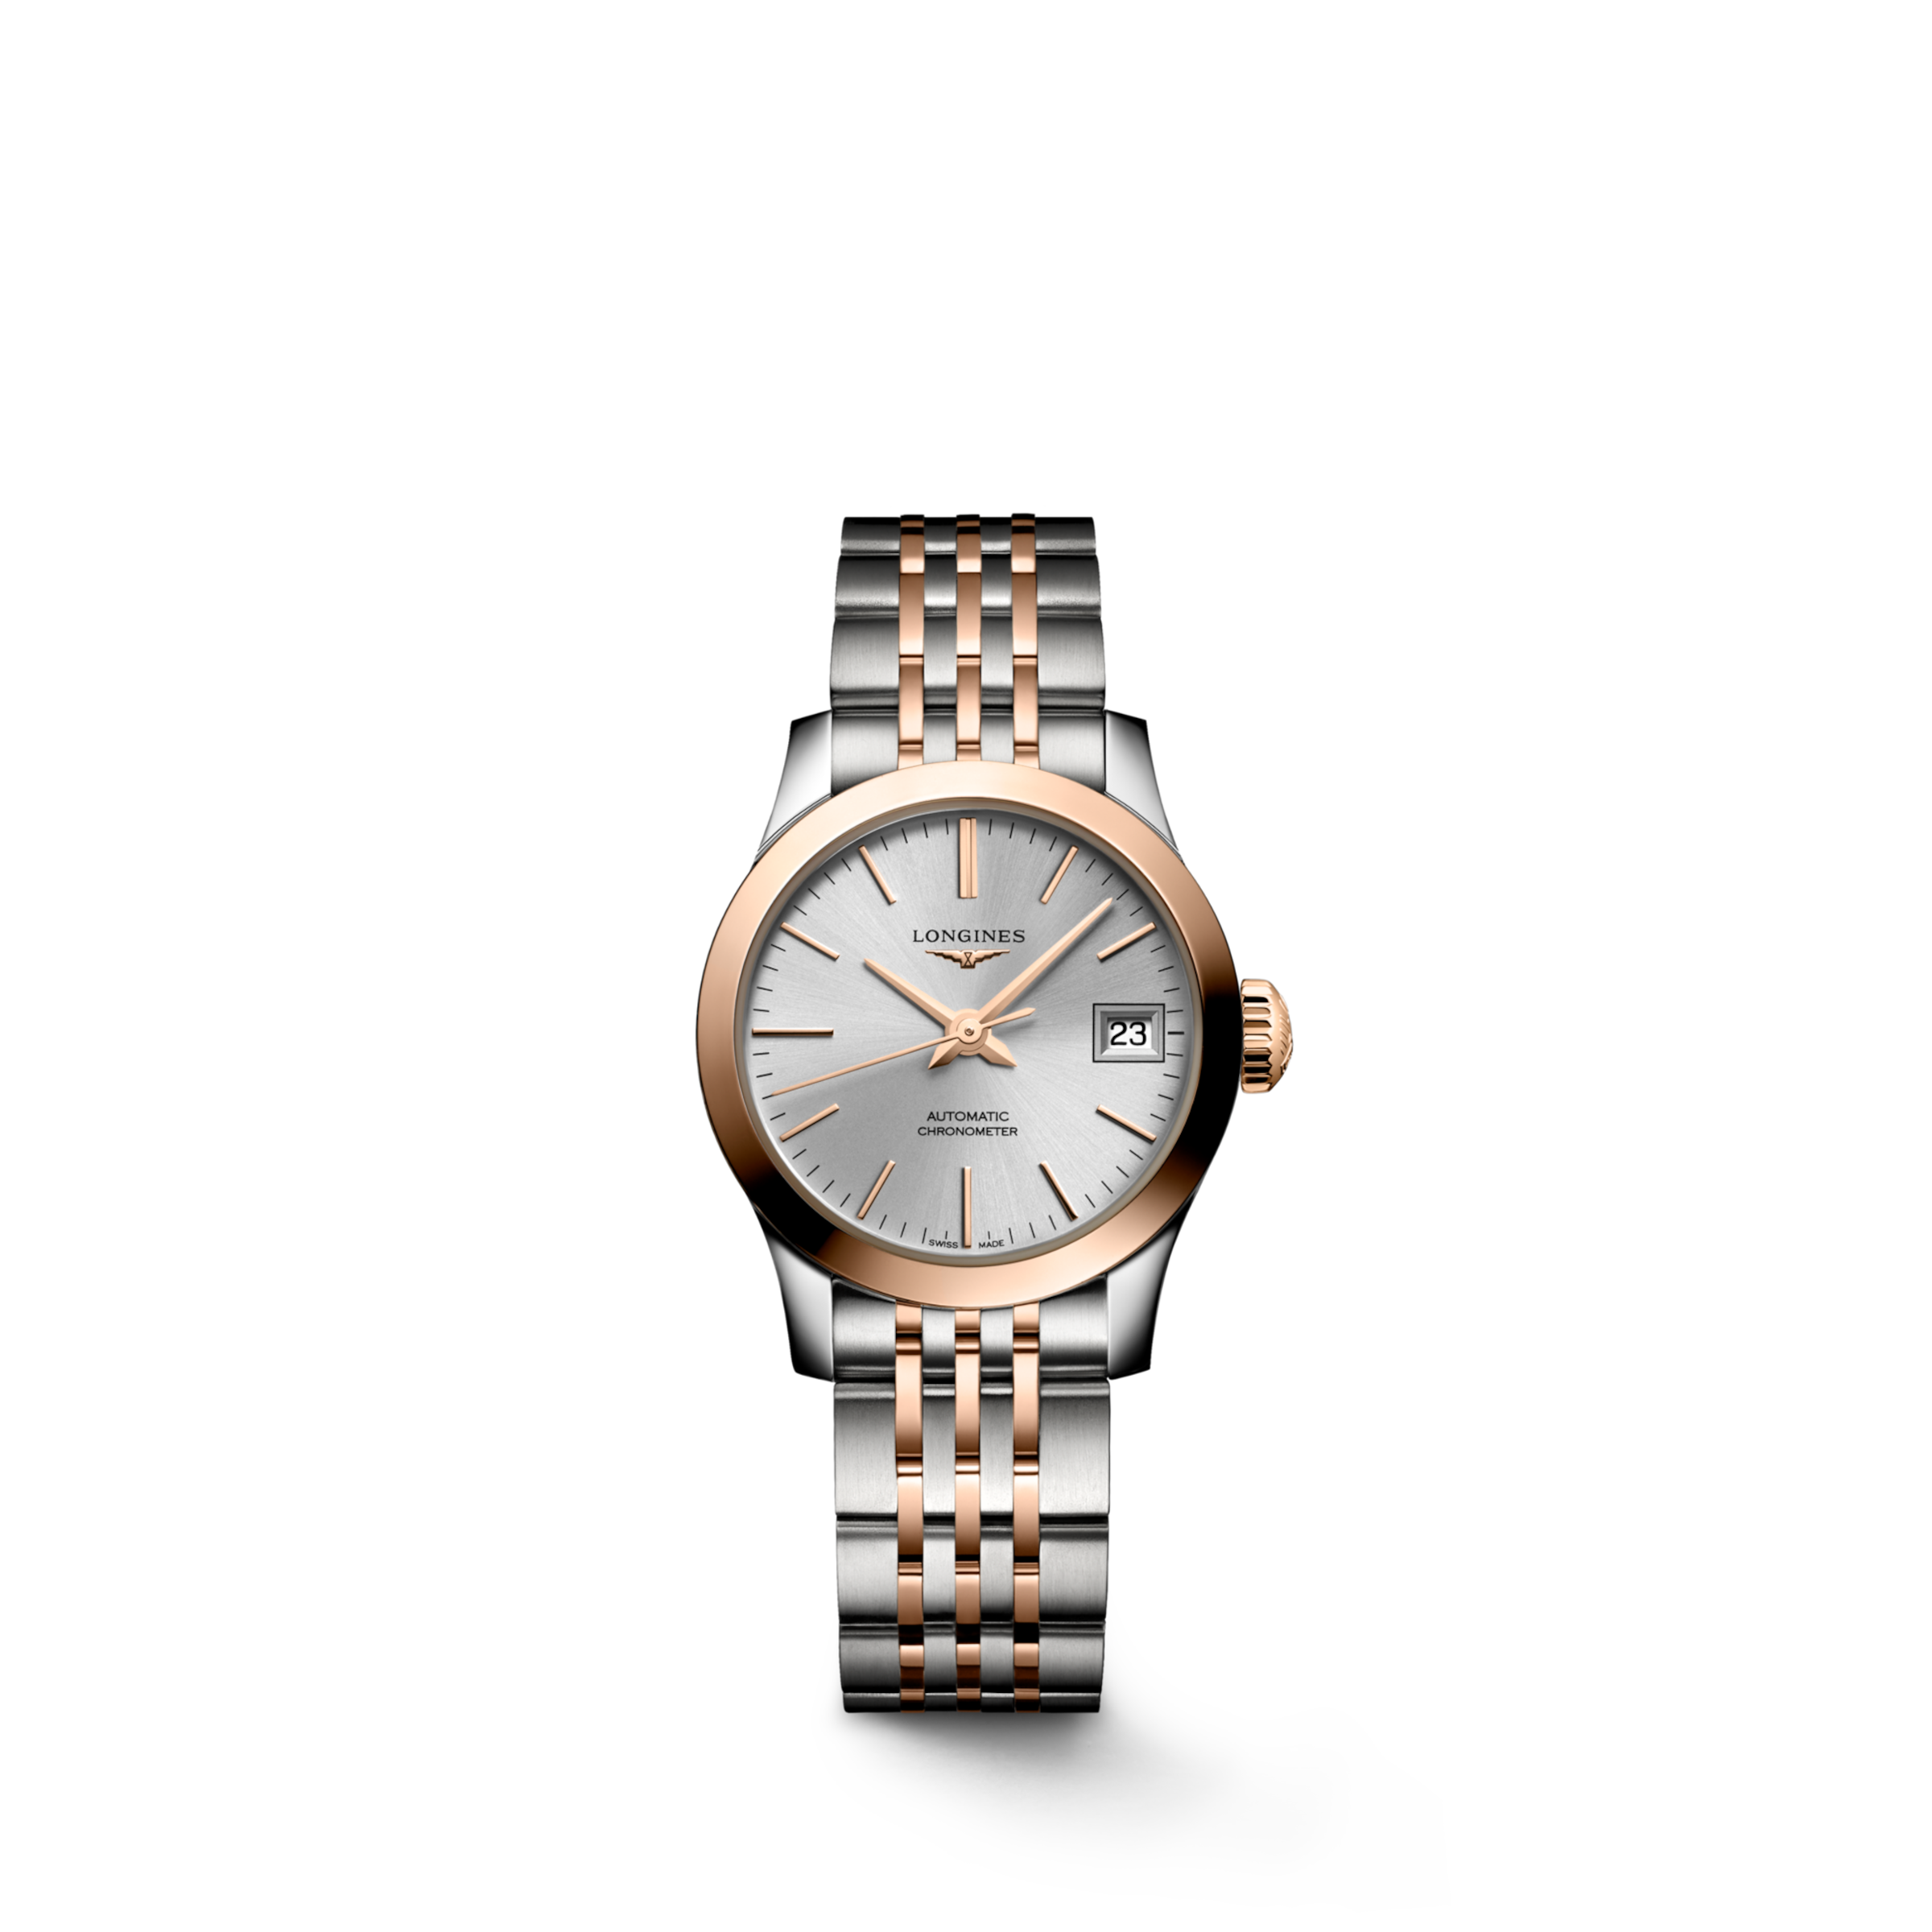 Longines RECORD Automatic Stainless steel and 18 karat pink gold cap 200 Watch - L2.320.5.72.7